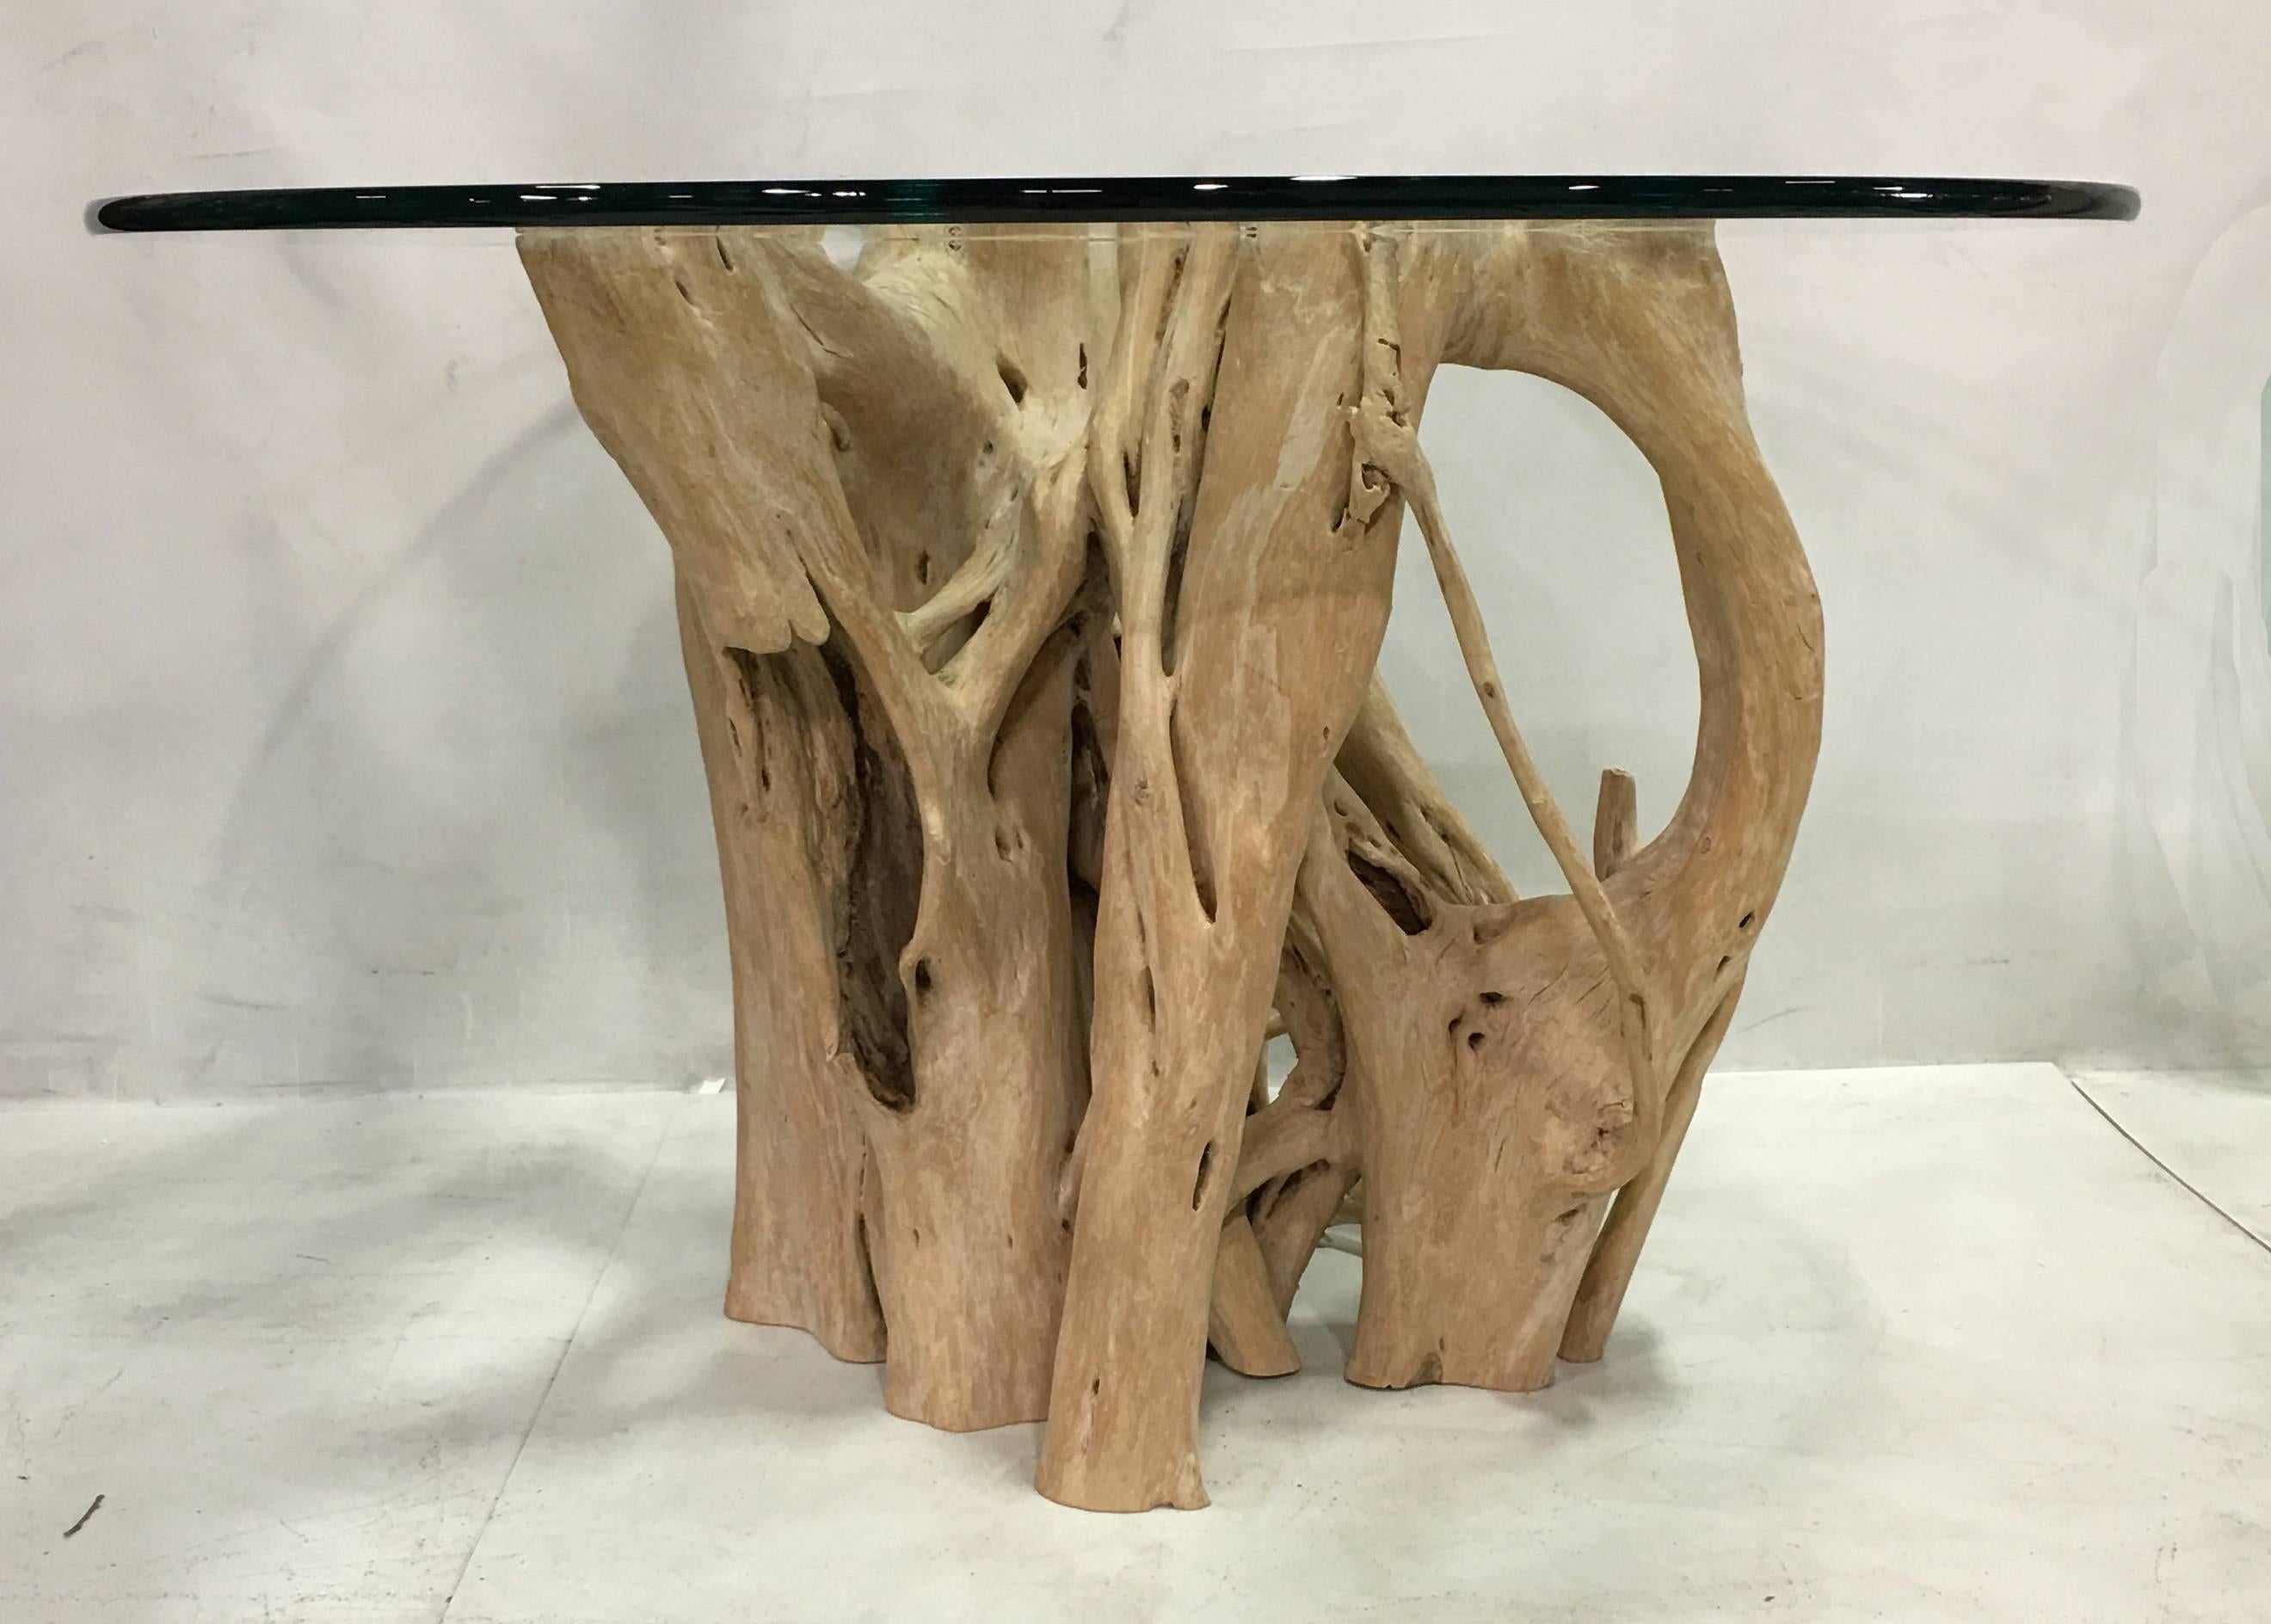 Fantastic sculptural Cypress Trunk Dining Table with thick 3/4" Bullnose edge glass top by Michael Taylor c. 1980s. Being in San Francisco, we've seen several of these over the years but this is, by far, the best one we've come across. The